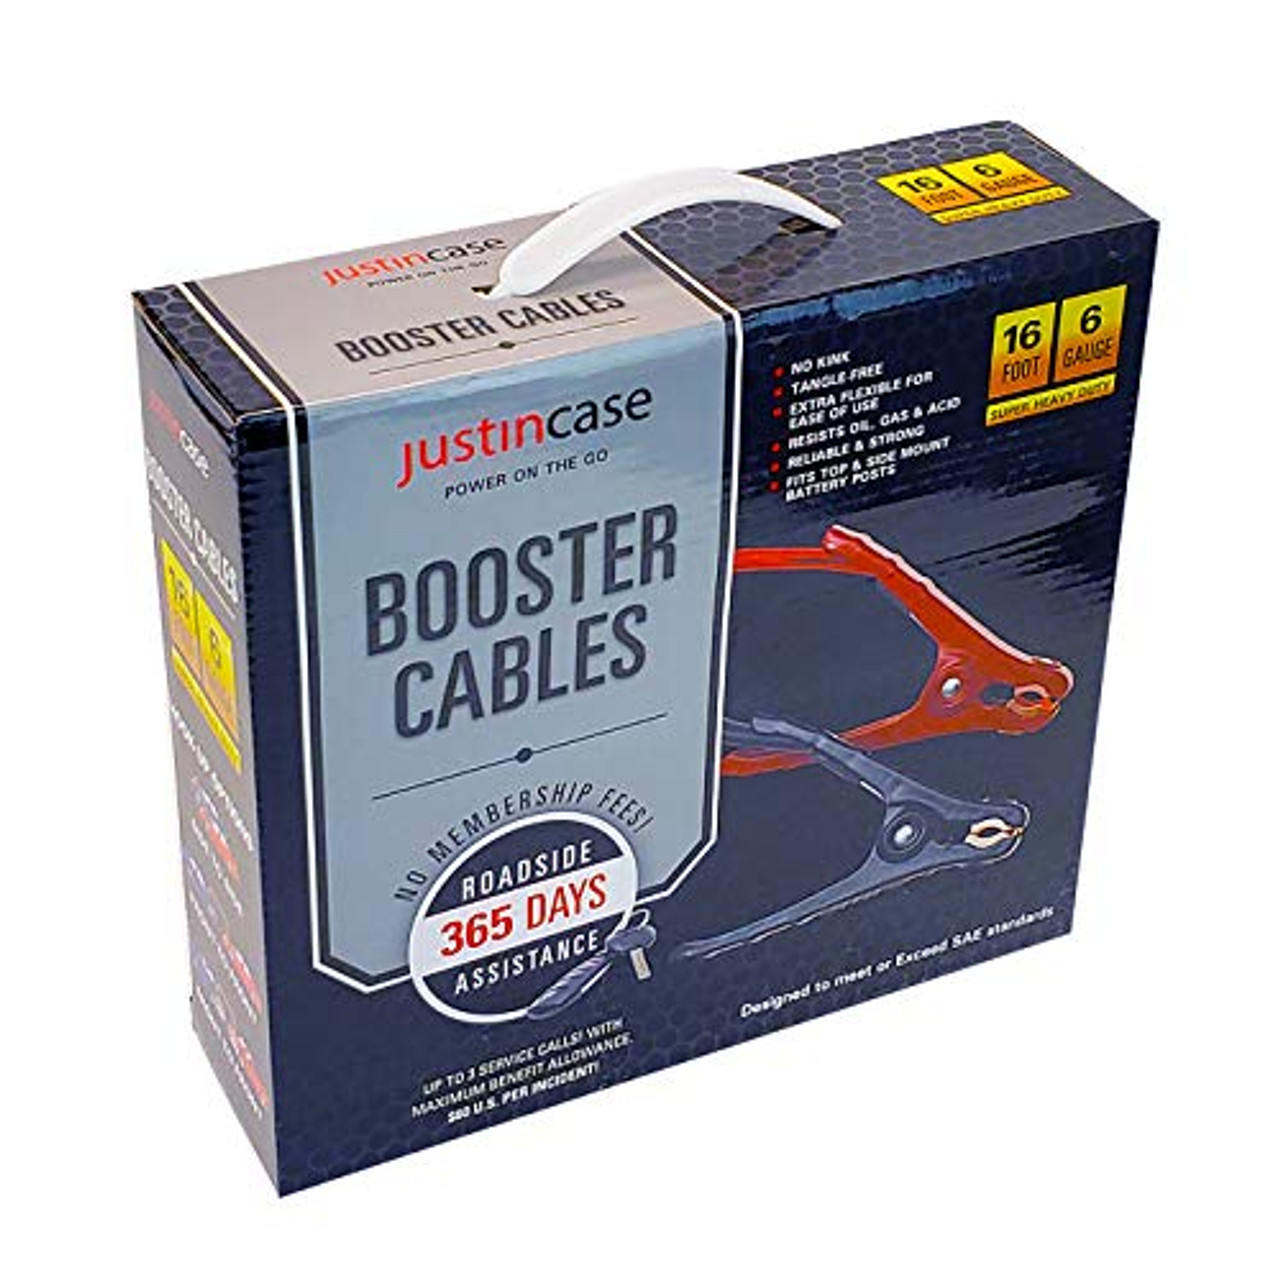 Justin Case JCBC1606 16' 6G Booster Cable with 365-Day Roadside Assistance